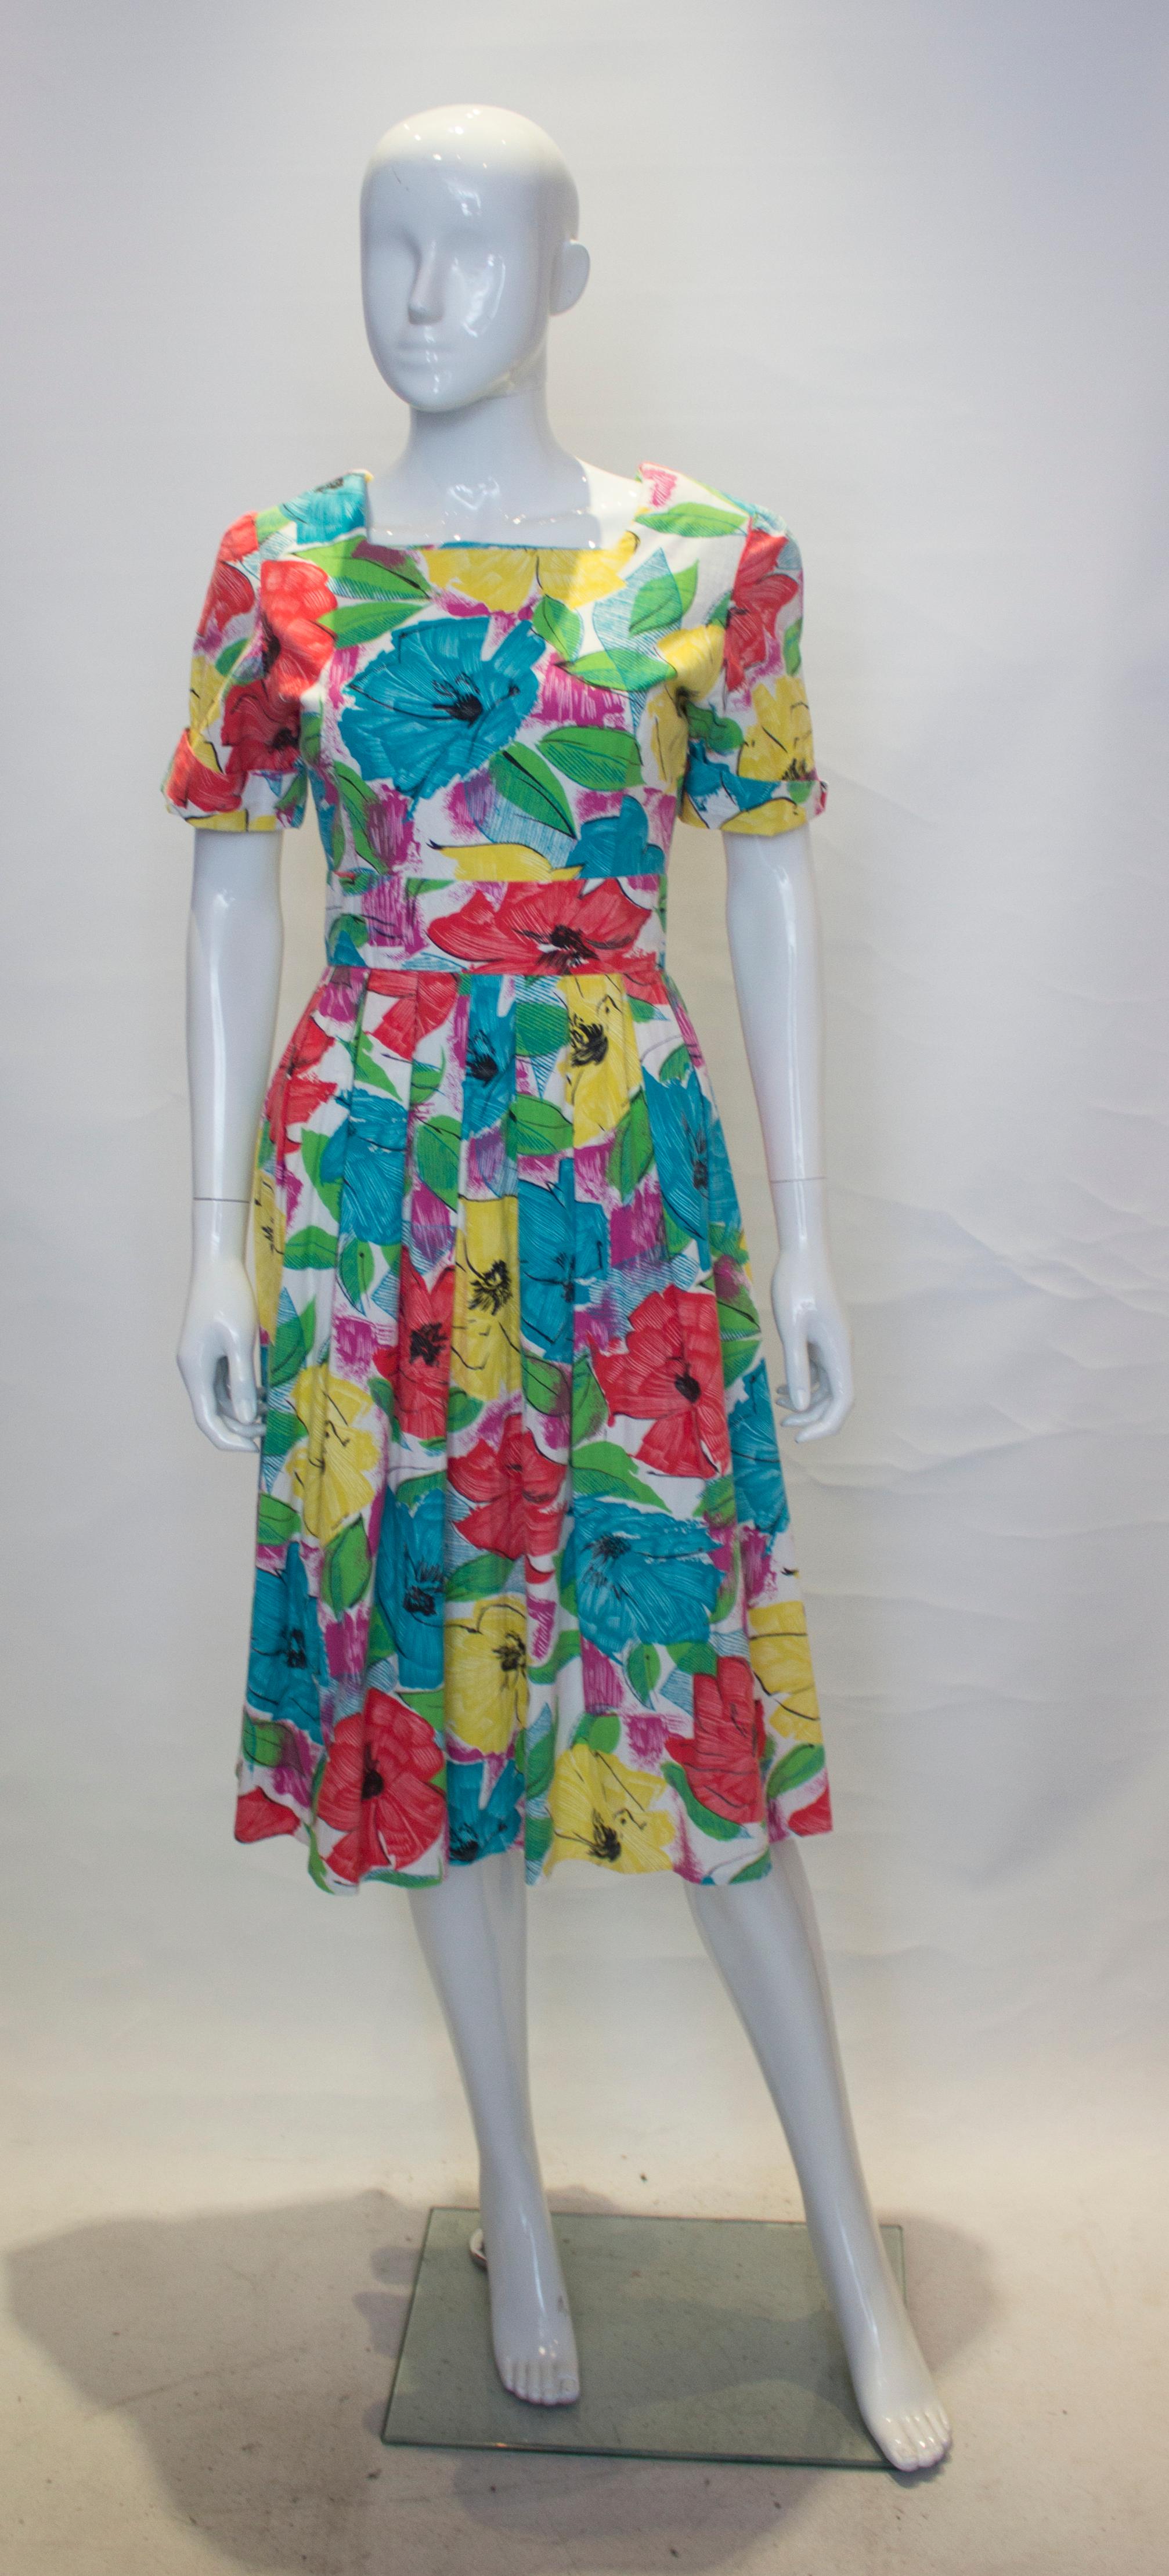 A headturning dress for Summer. This flora cotton dress in an attractive mix of  green , yellow and pink, has a square neckline and backline with band detail at the back.  It has short sleaves with turn back cuffs, pleats at the waist and a button